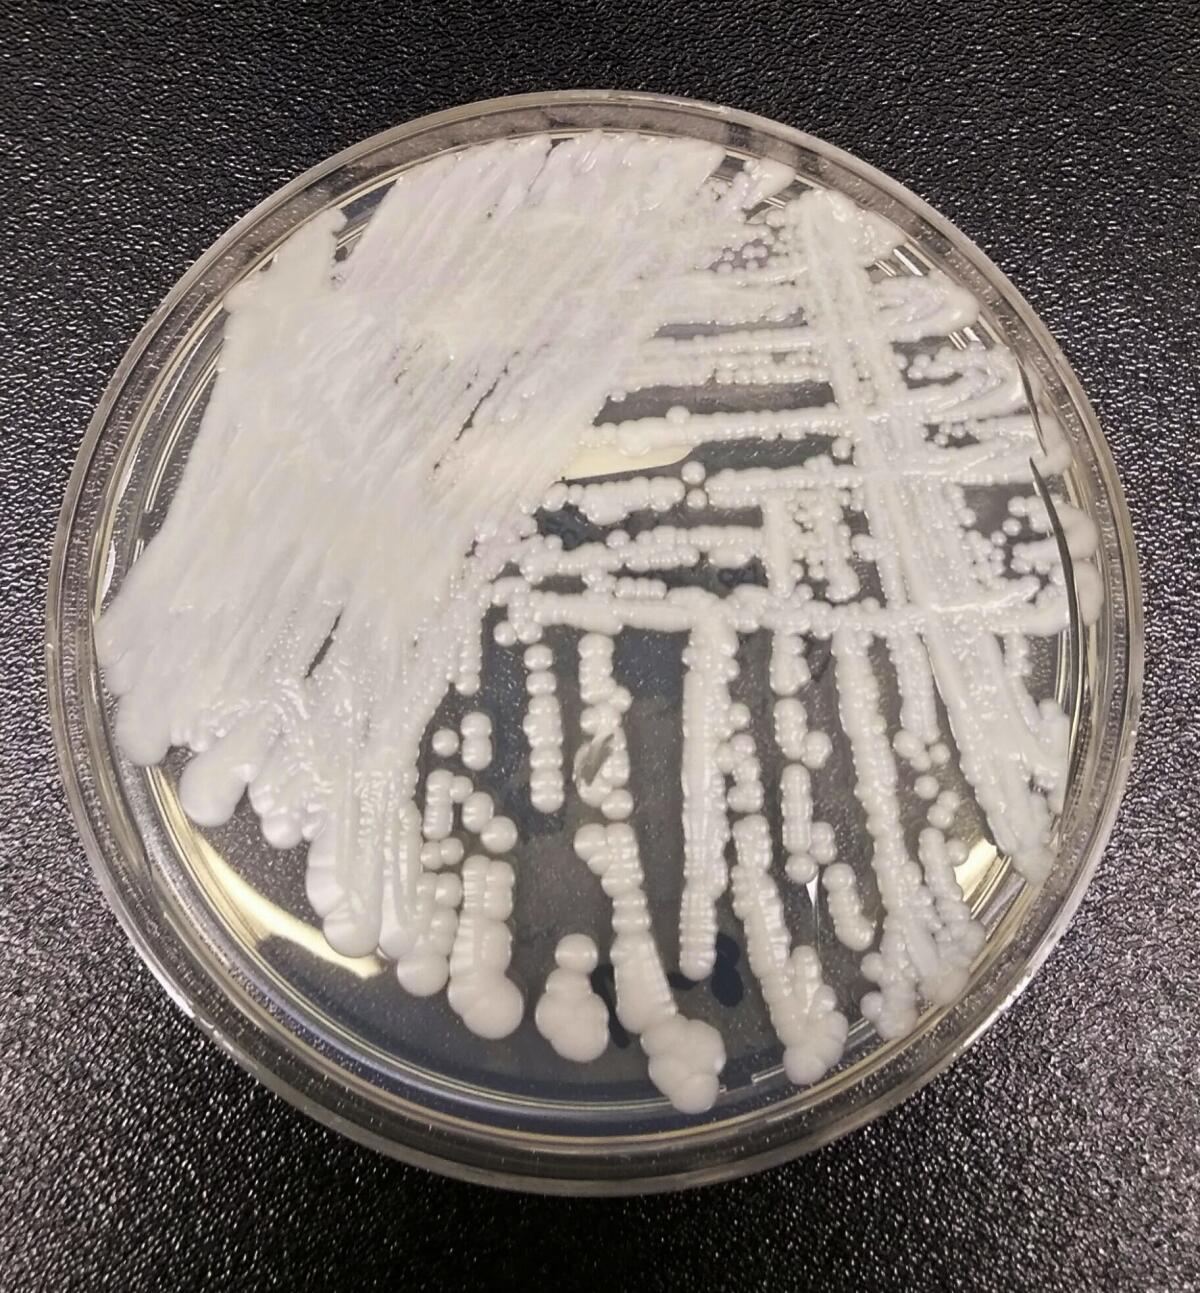 Drug resistant, potentially deadly, bacteria found of the surface